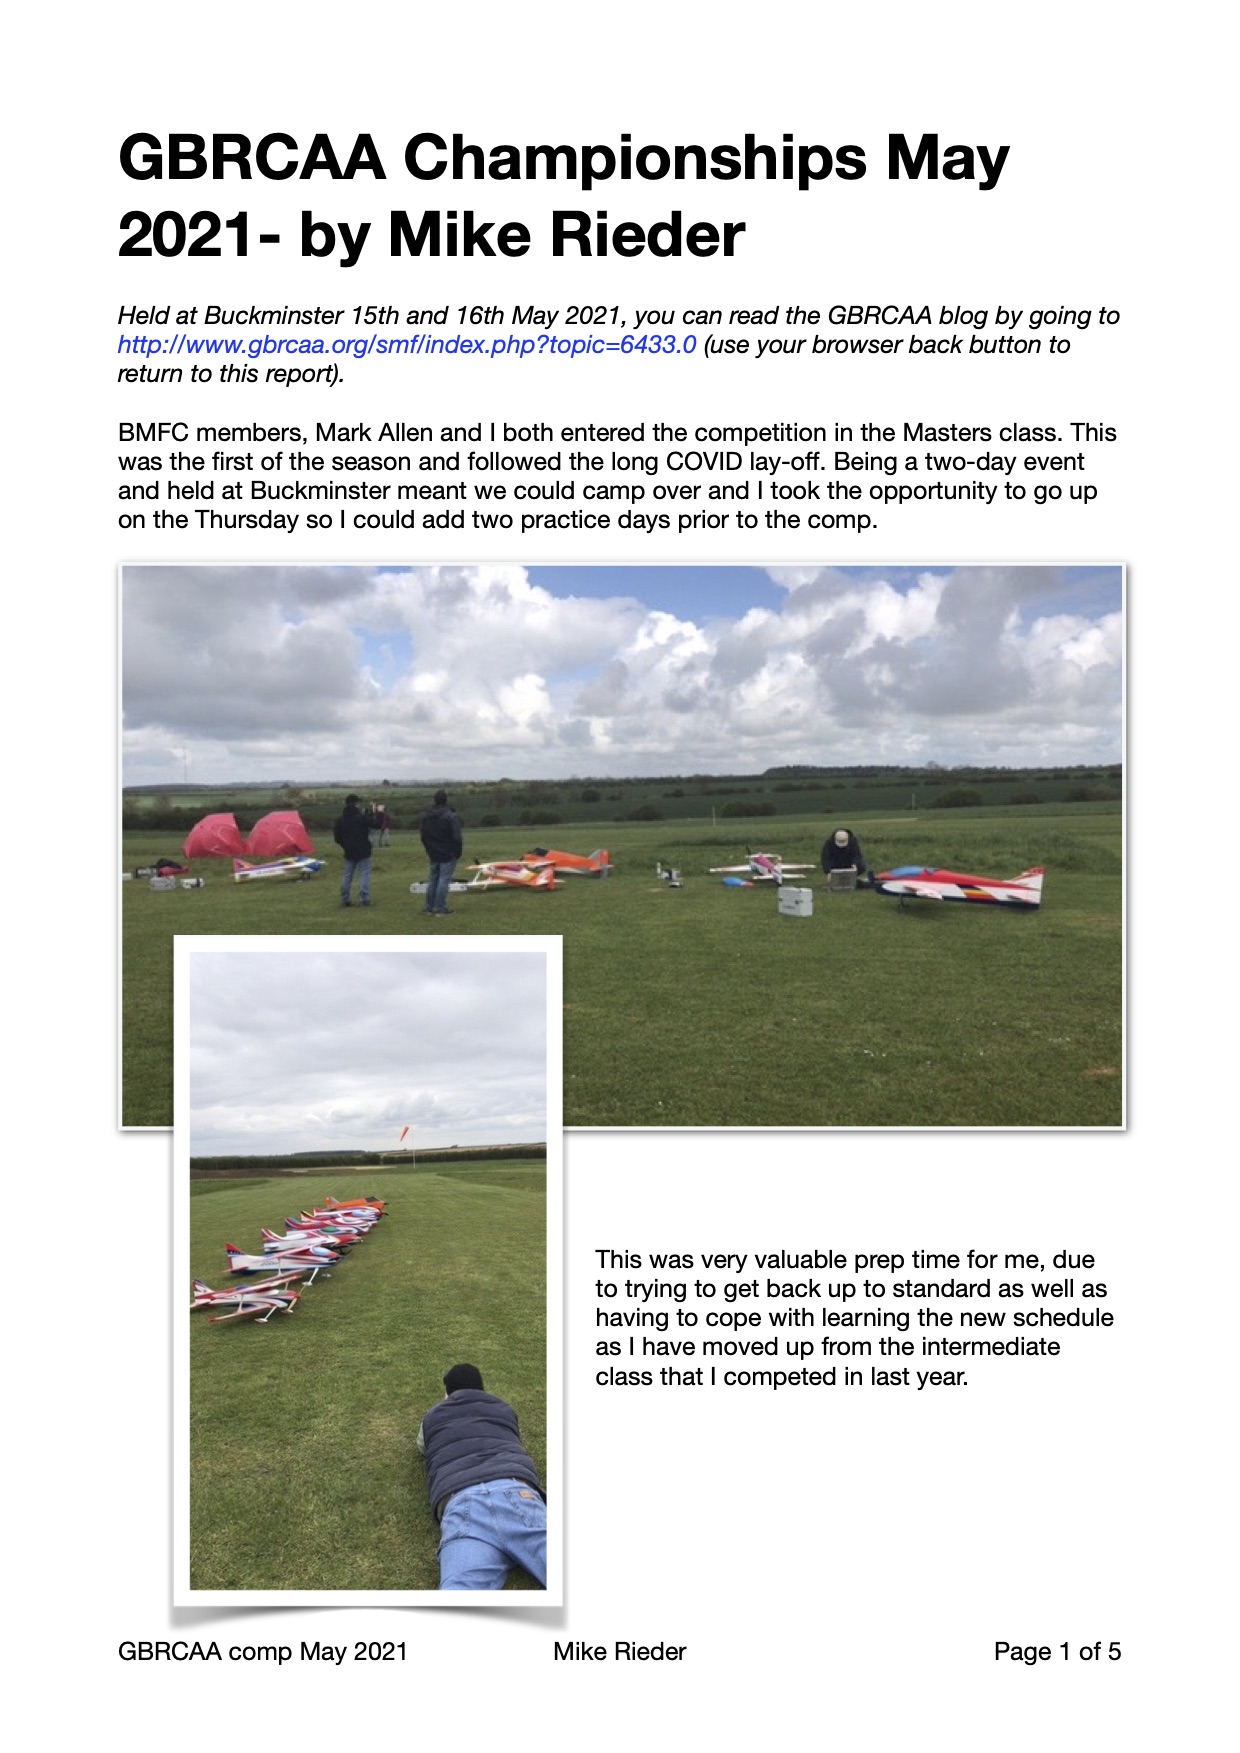 GBRCAA Competition at Buckminster May 2021